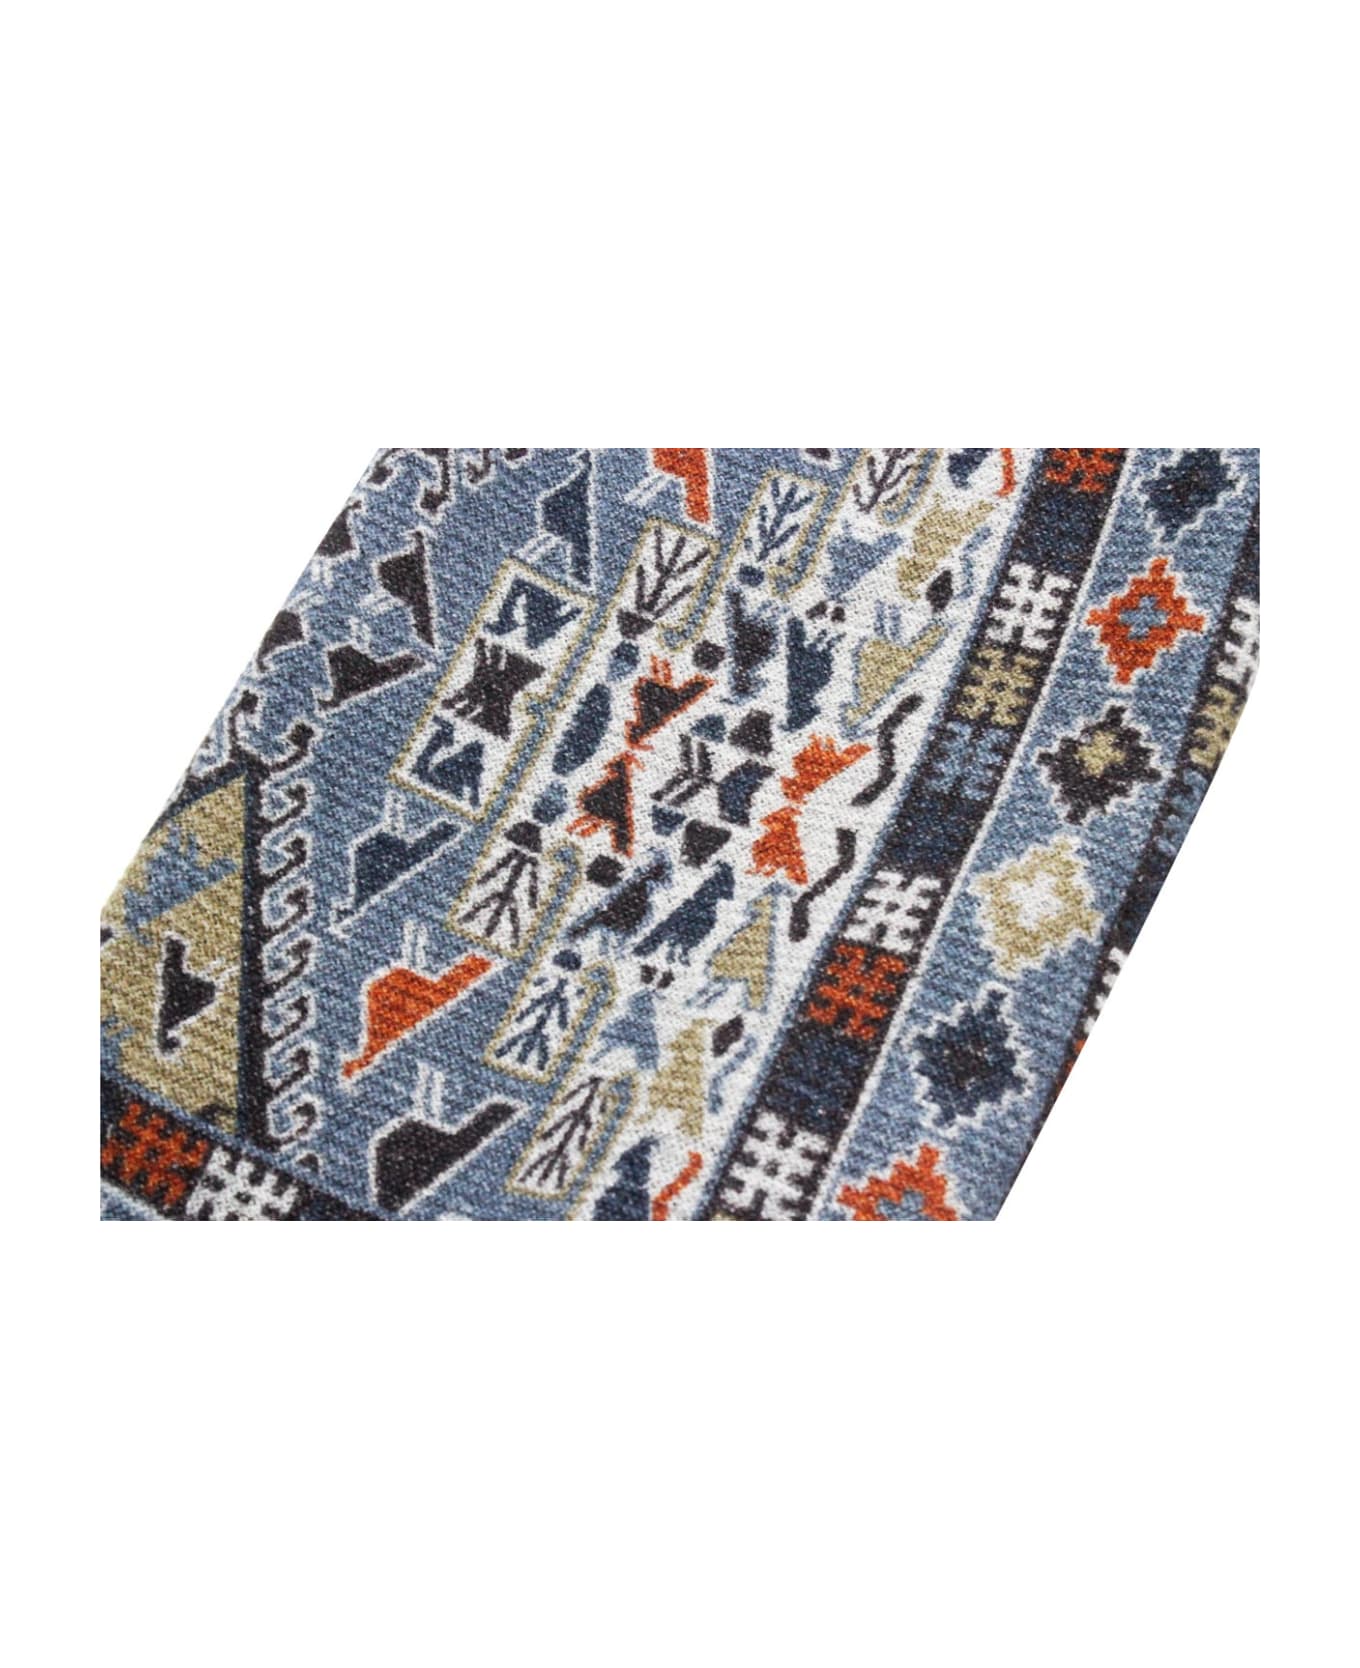 Kiton Light Scarf With Small Fringes At The Bottom With A Patterned Motif - Blu